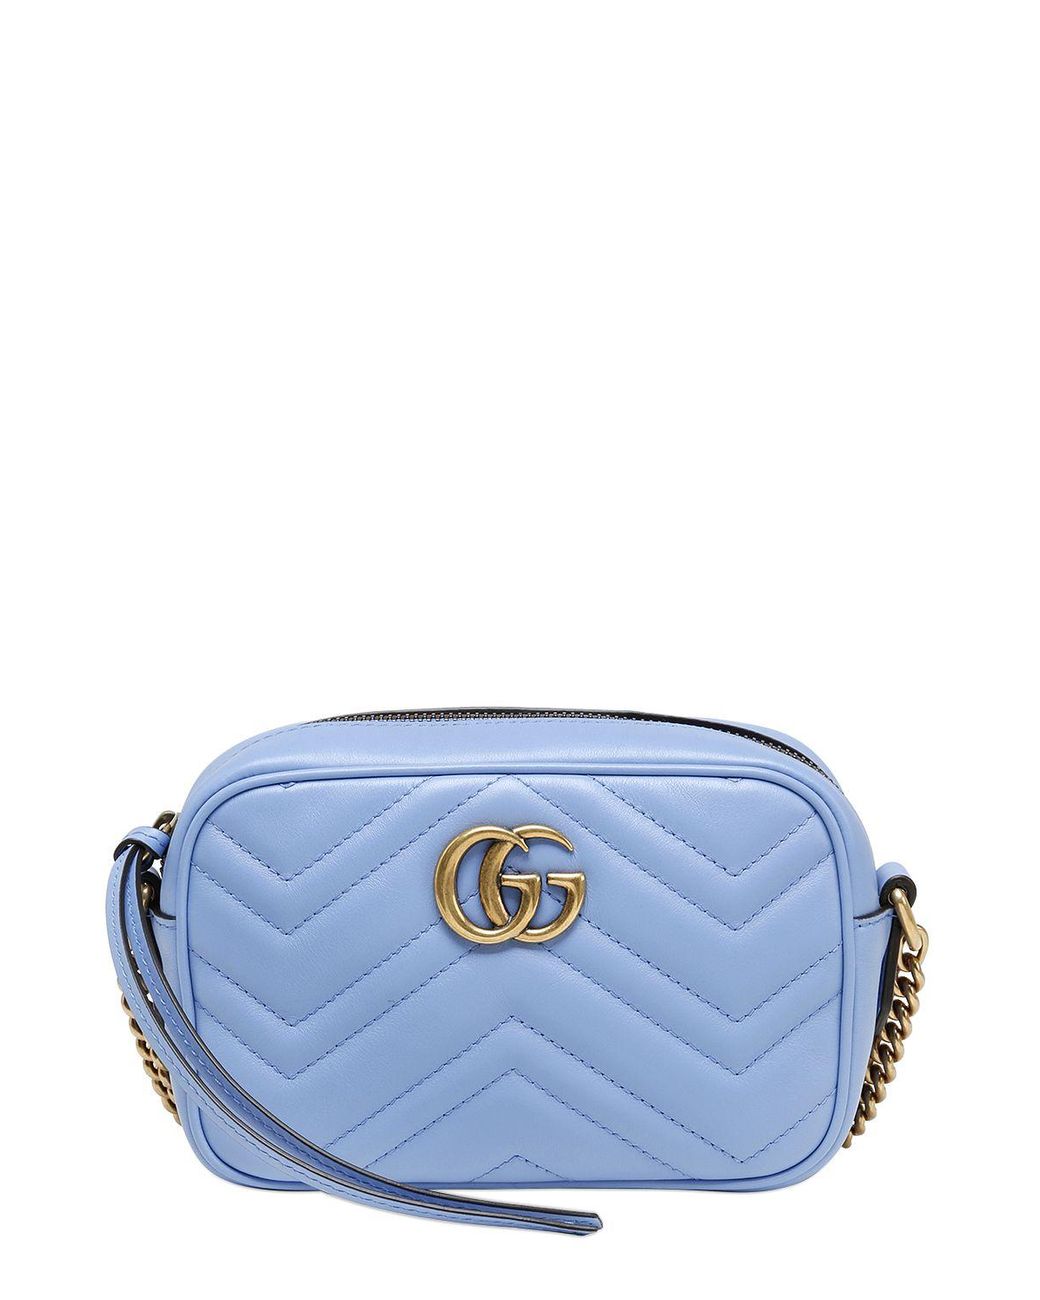 Gucci Mini Gg Marmont  Leather Bag in Blue | Lyst